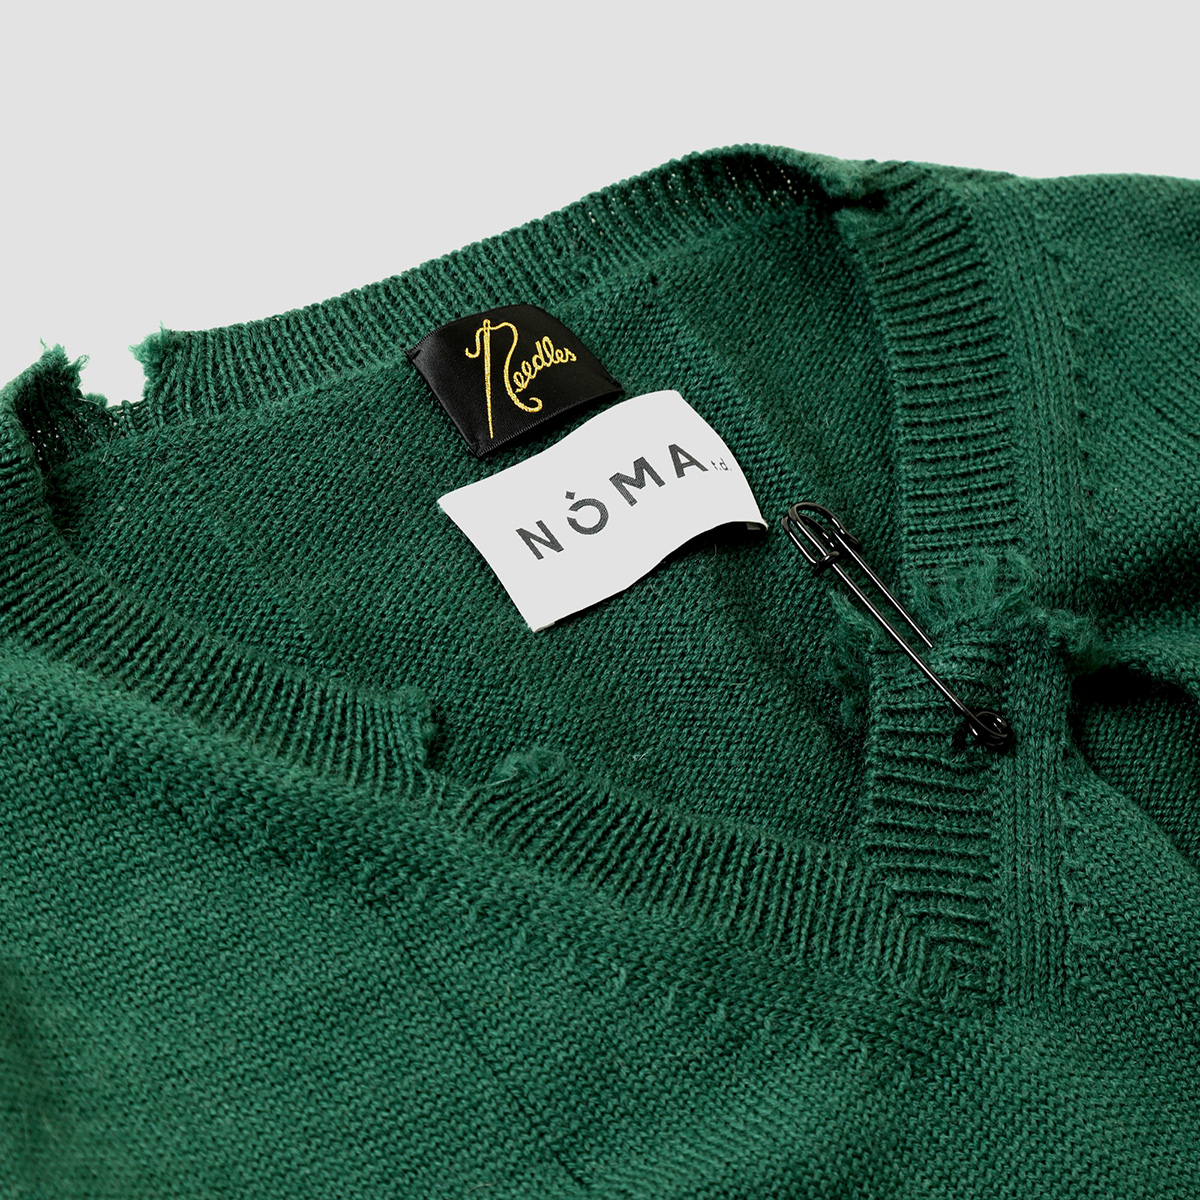 〈NEEDLES〉 x 〈NOMA t.d.〉2021 FALL WINTER COLLECTION